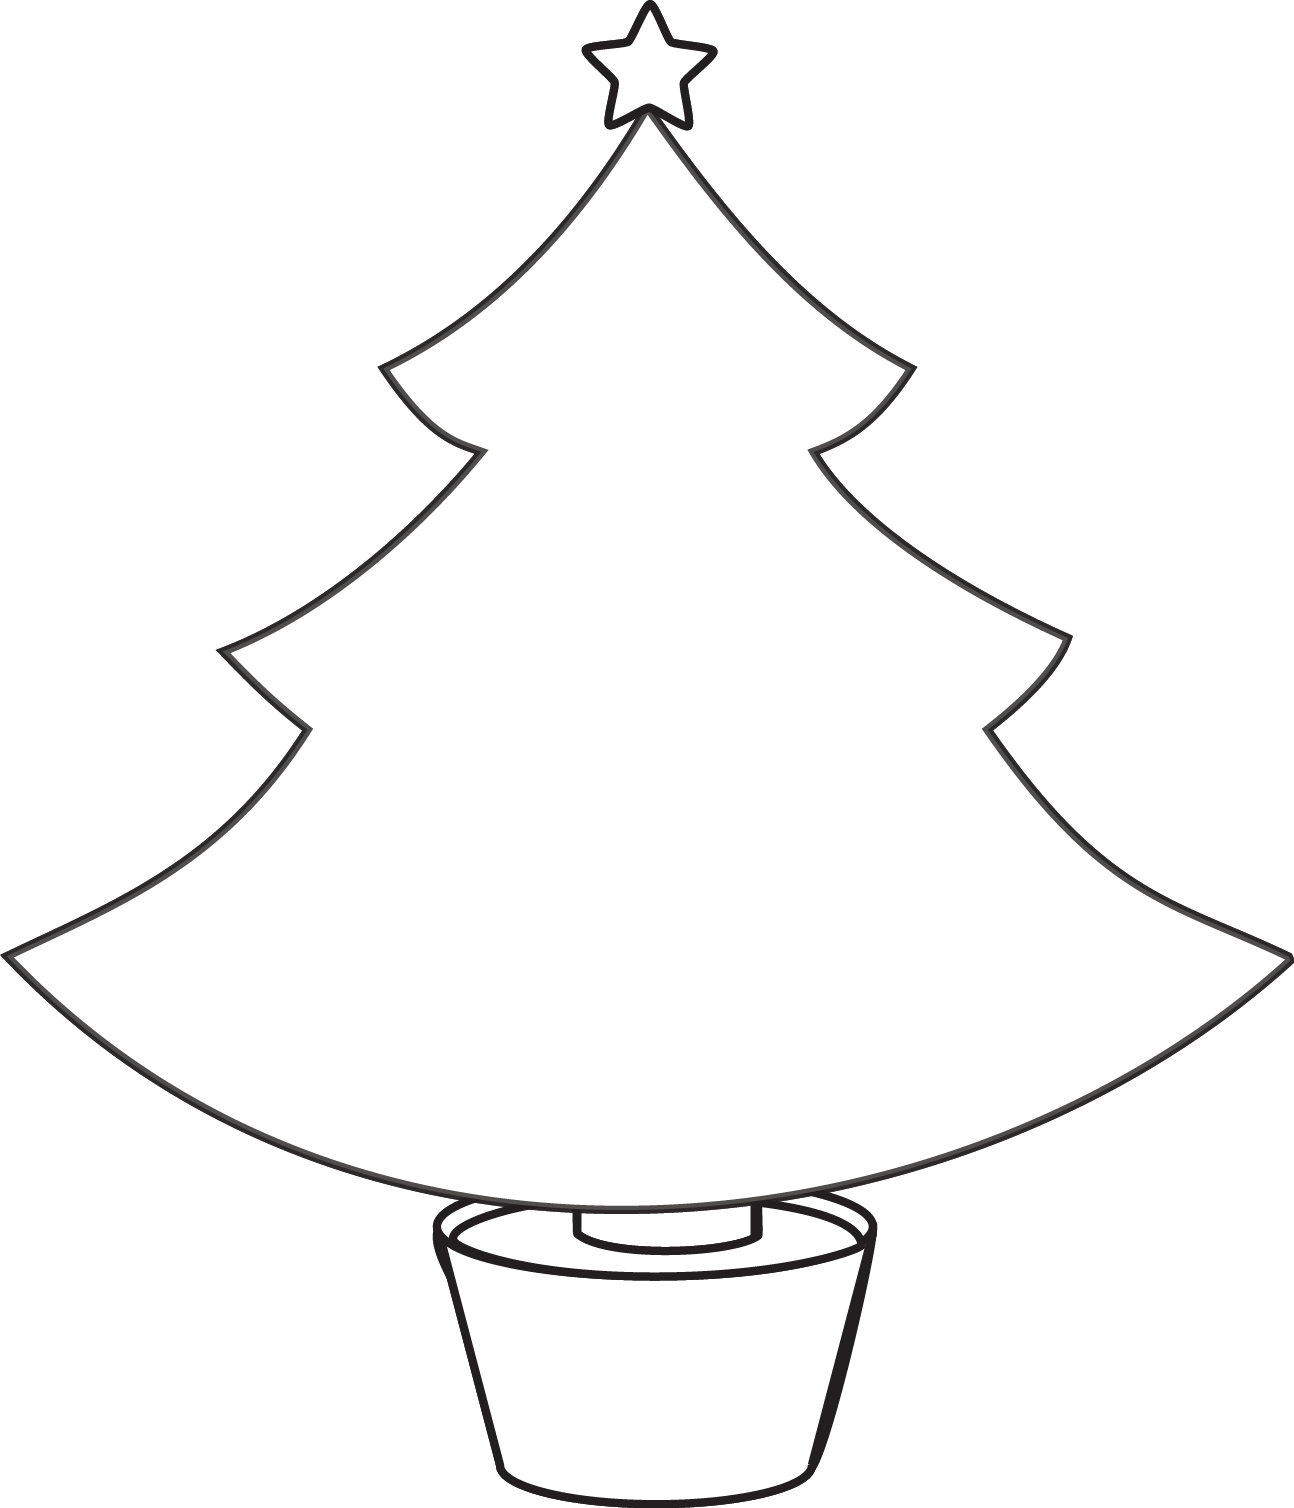 free-christmas-tree-line-drawing-download-free-christmas-tree-line-drawing-png-images-free